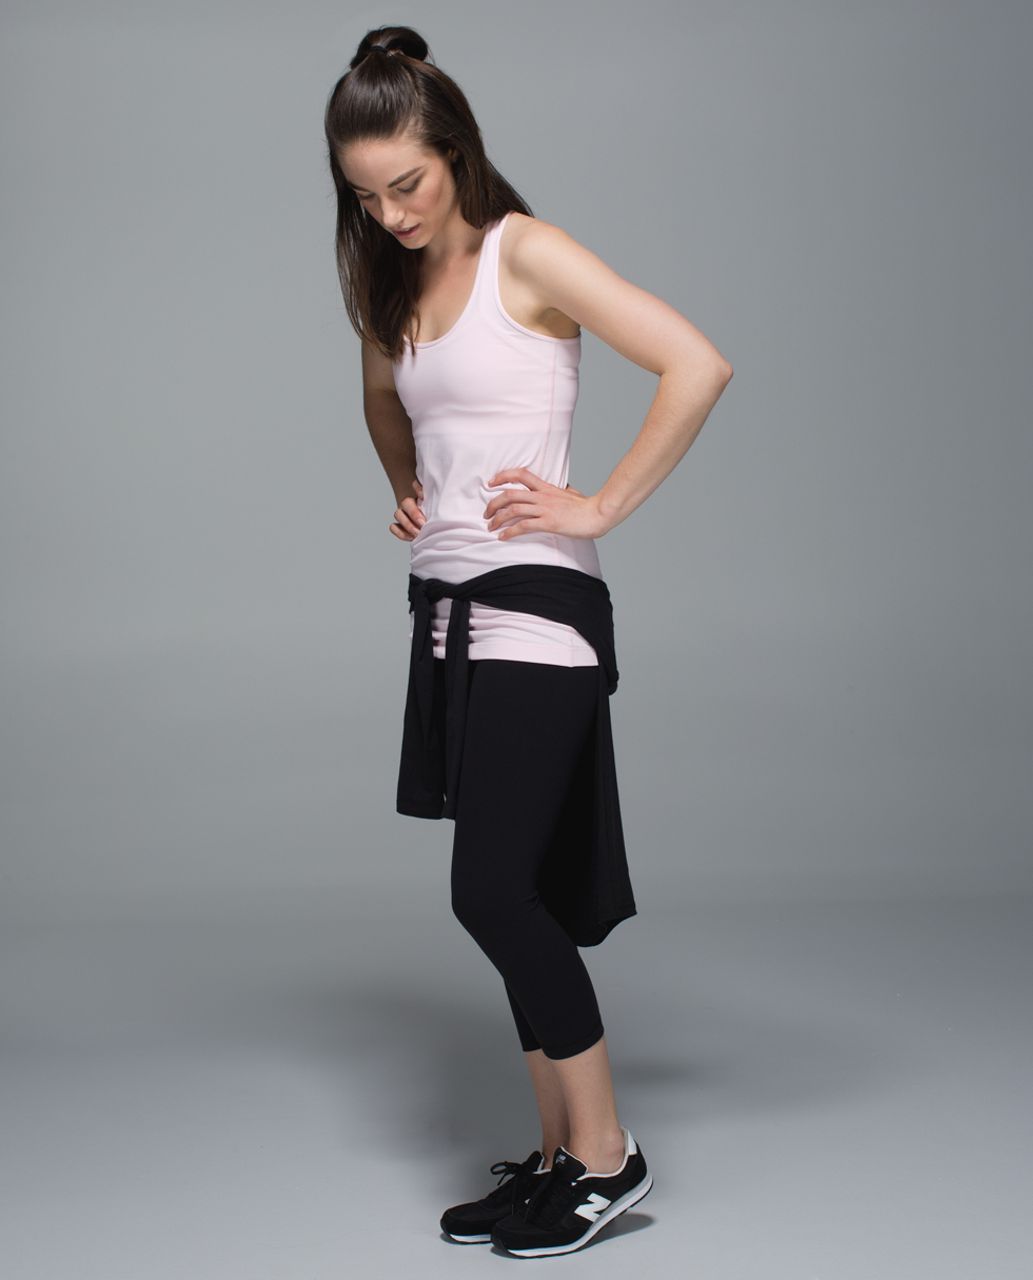 Prisma Racer Fit-Strawberry: Stylish and Comfortable Activewear